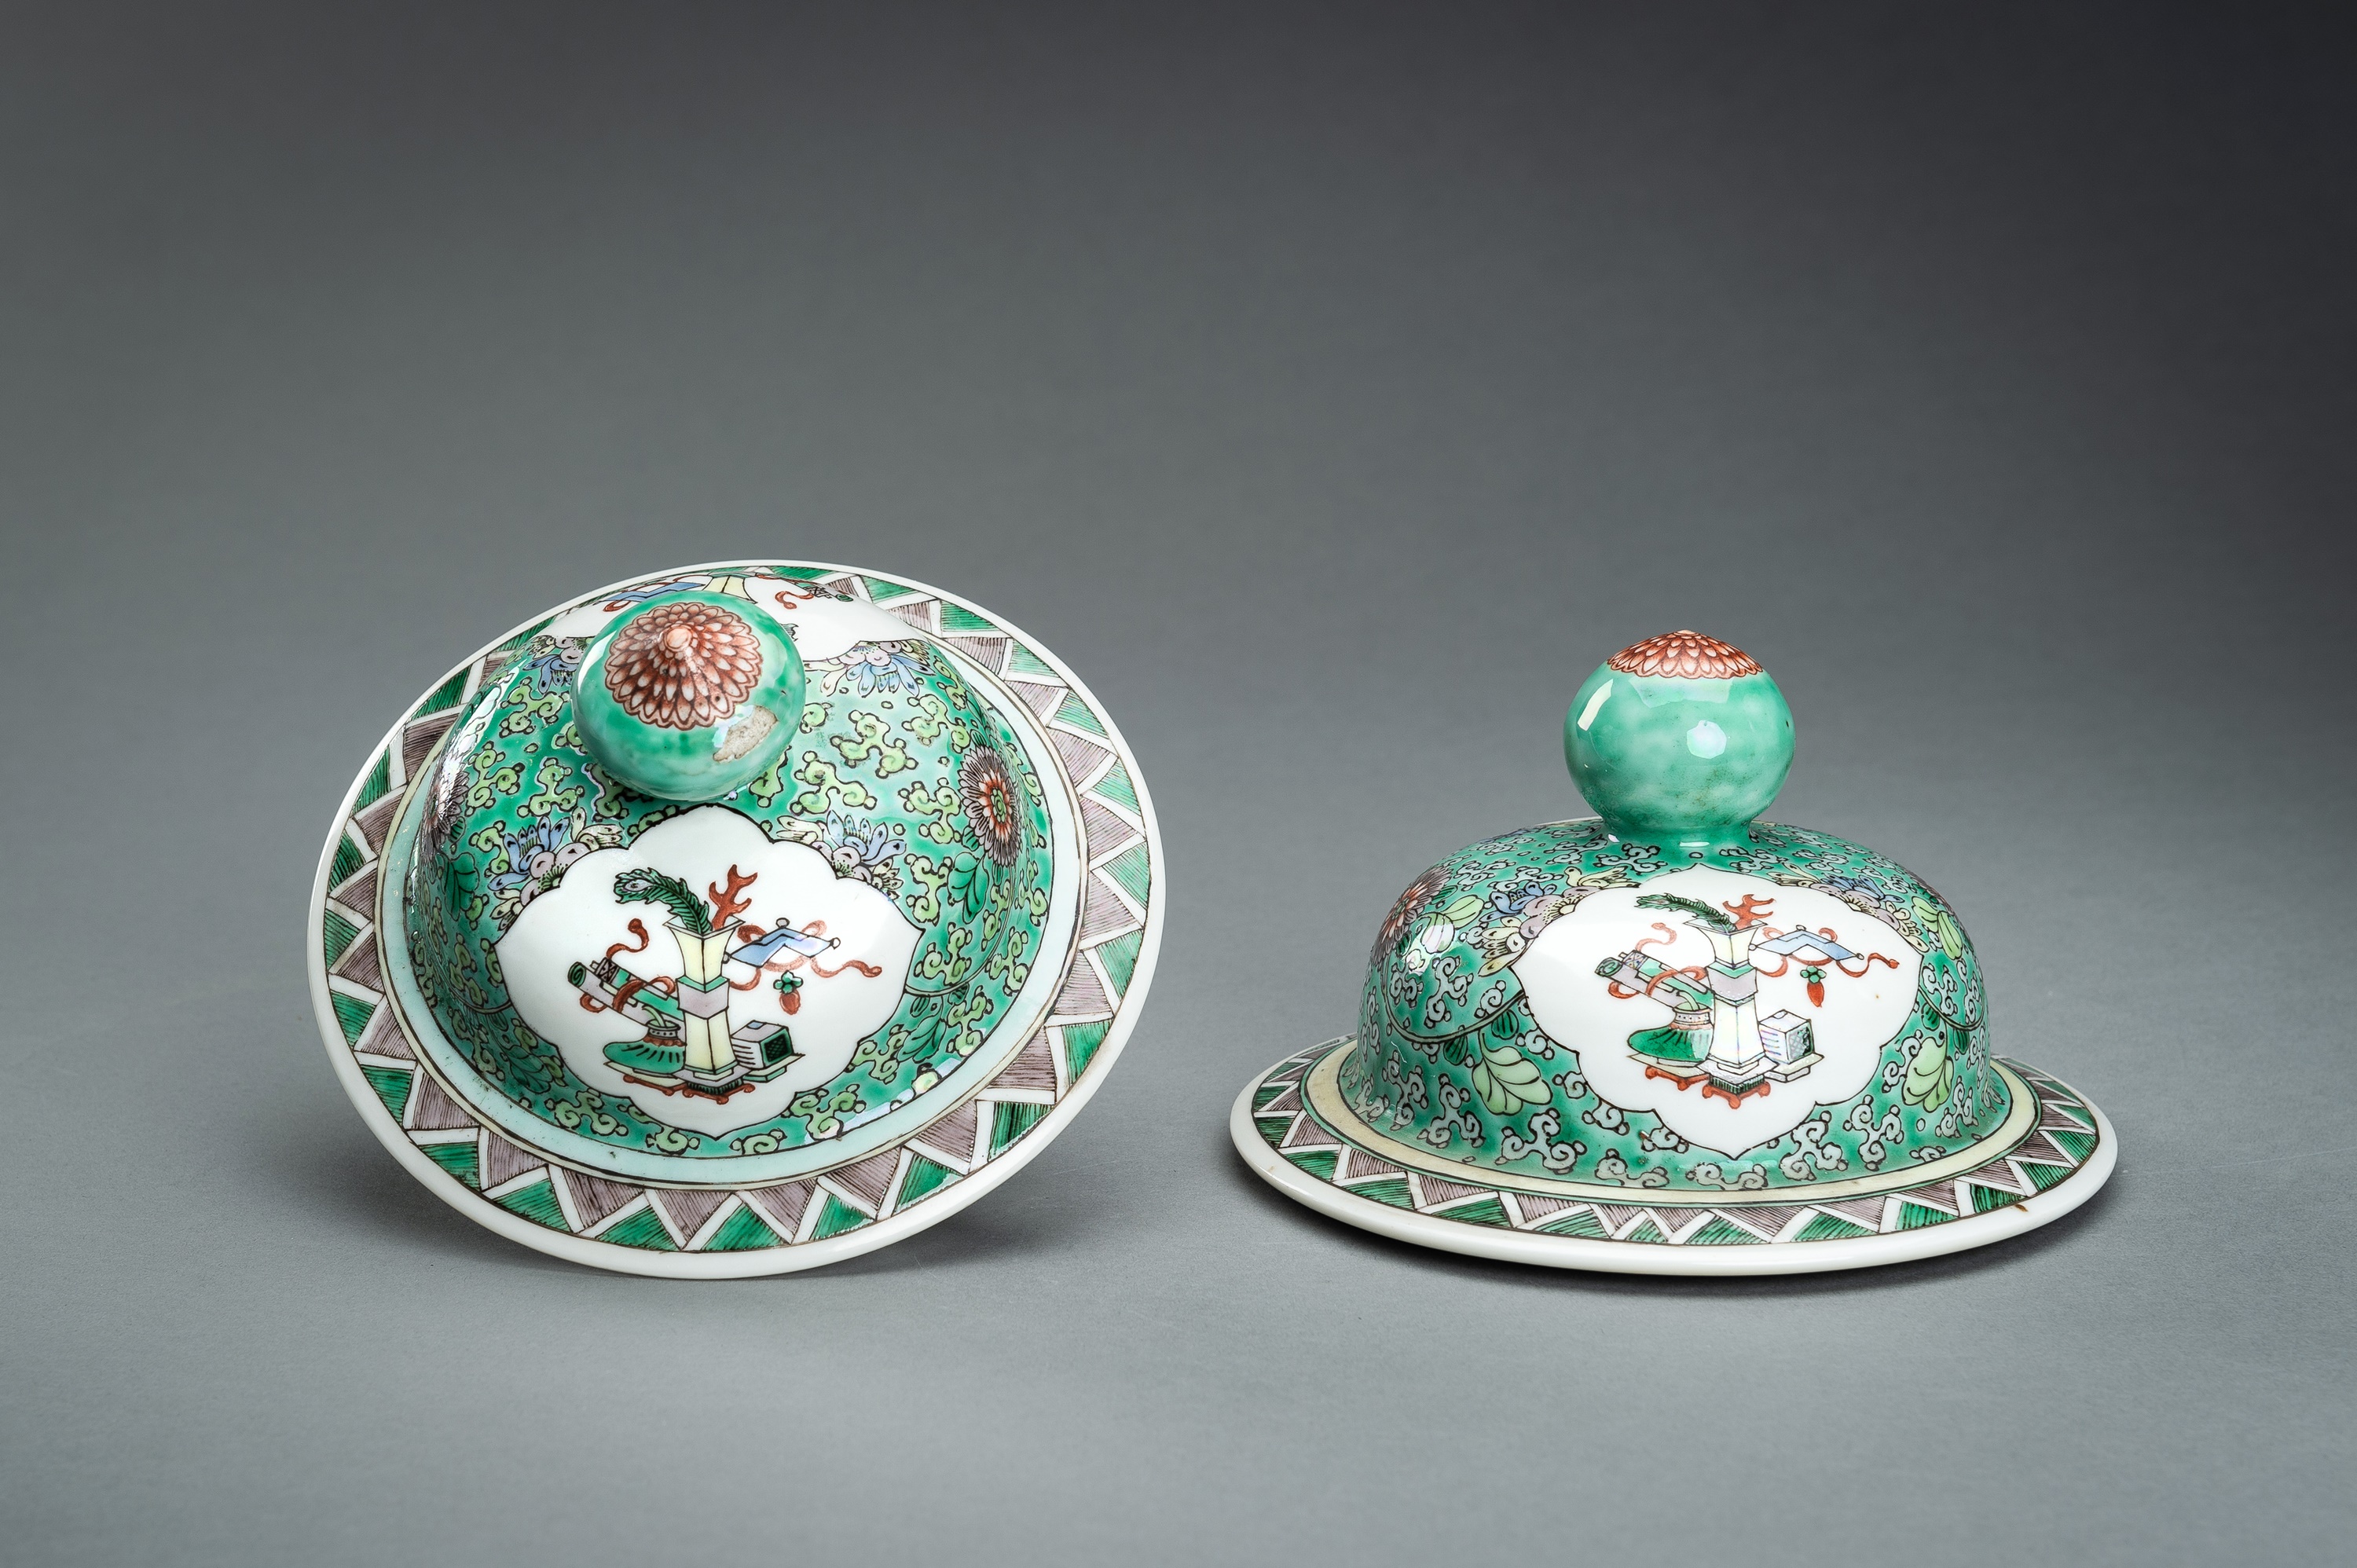 A LARGE PAIR OF FAMILLE VERTE PORCELAIN VASES WITH COVERS, 19th CENTURY - Image 18 of 24